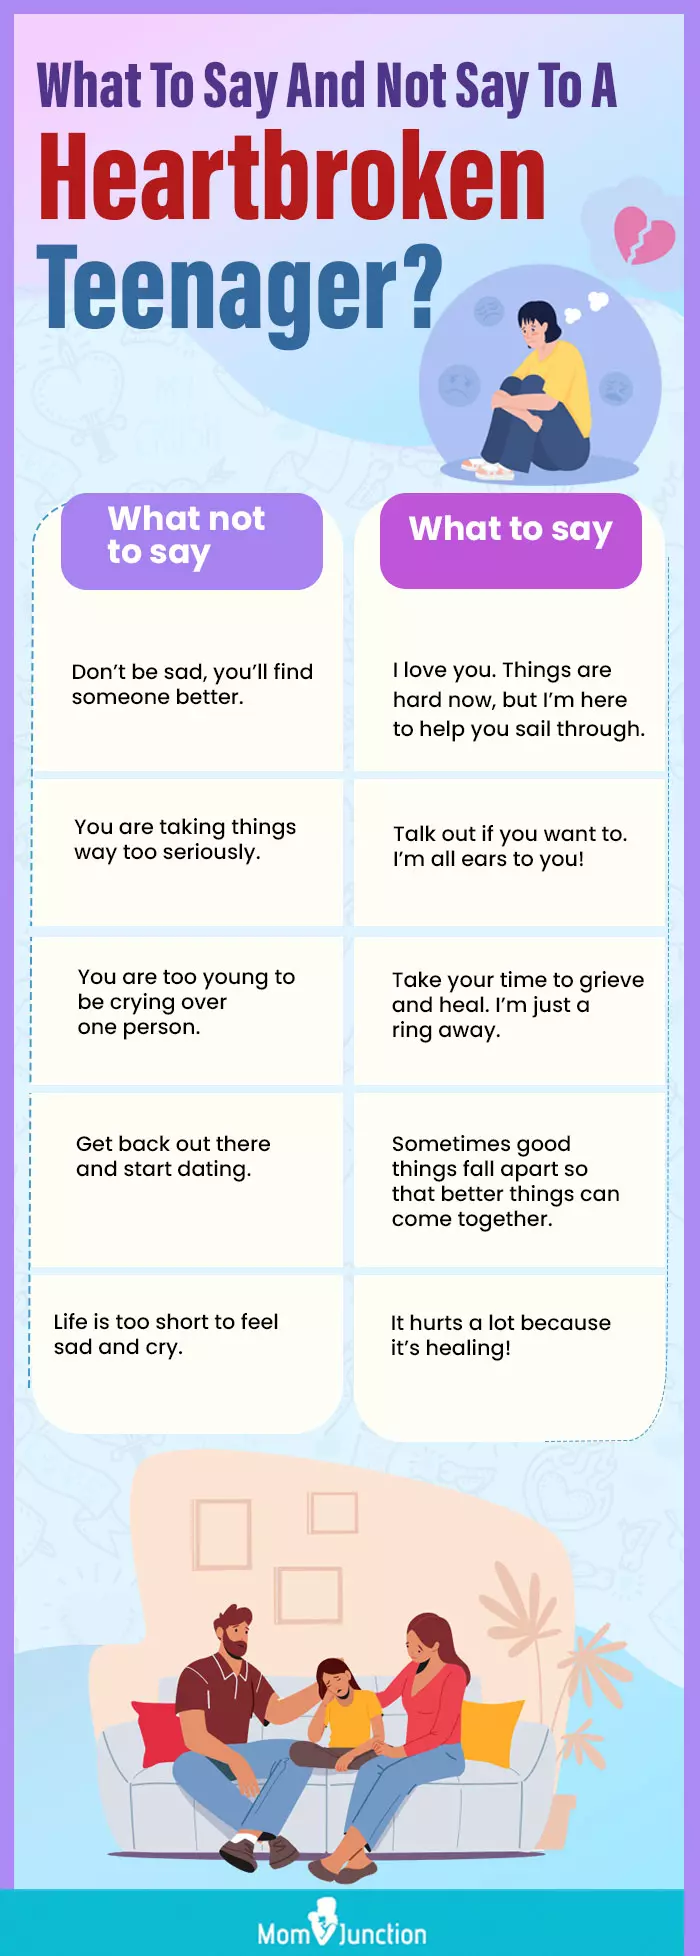 what to say and not say to a heartbroken teenager (infographic)